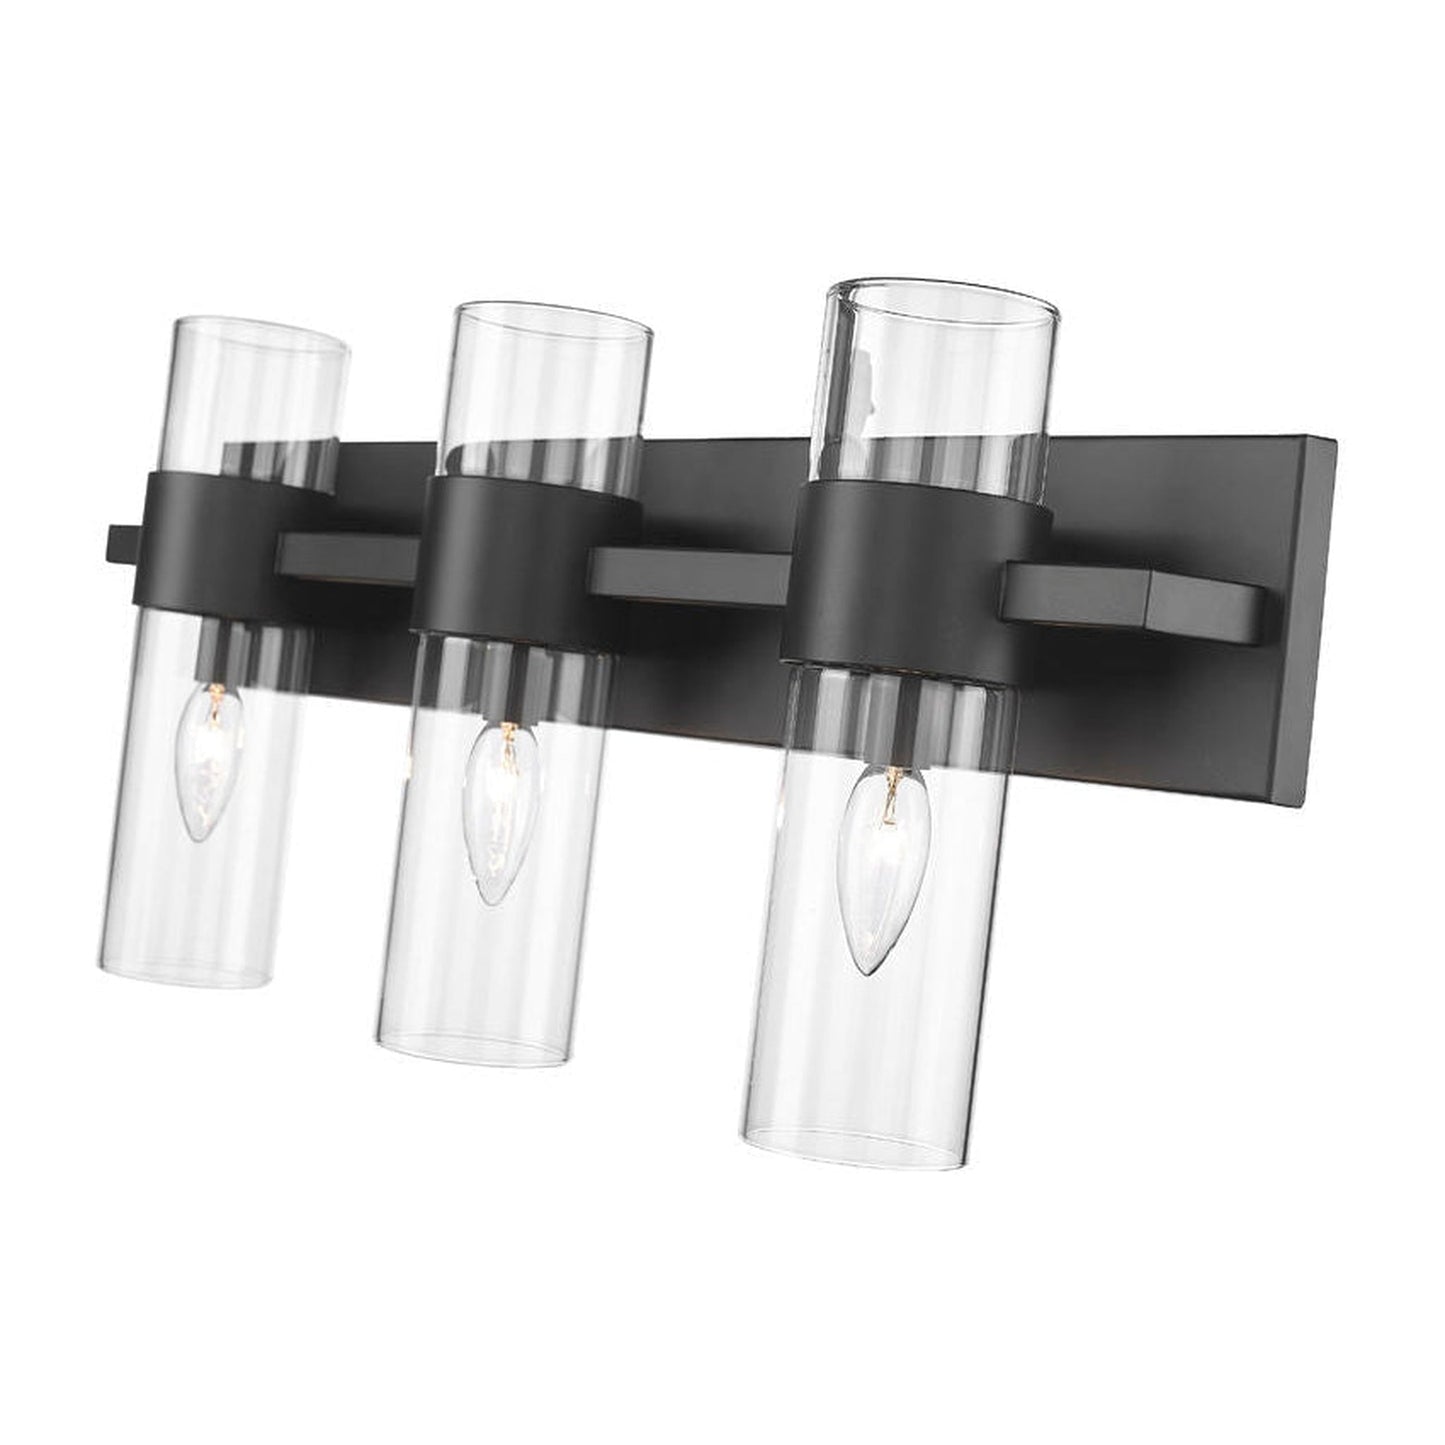 Z-Lite Lawson 25" 3-Light Matte Black Vanity Light With Clear Glass Shade